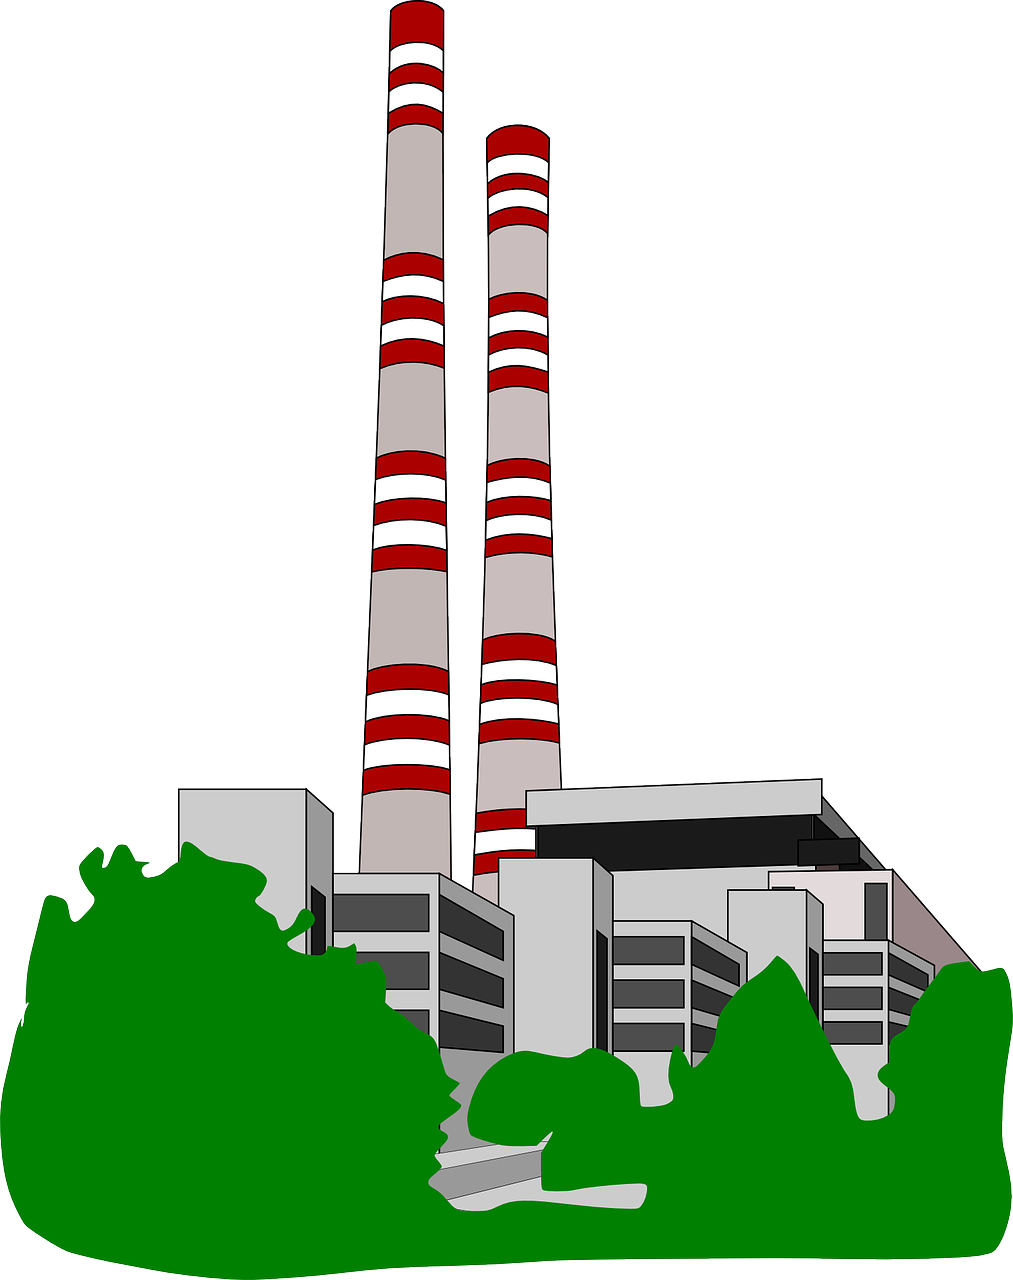 Factory clipart images